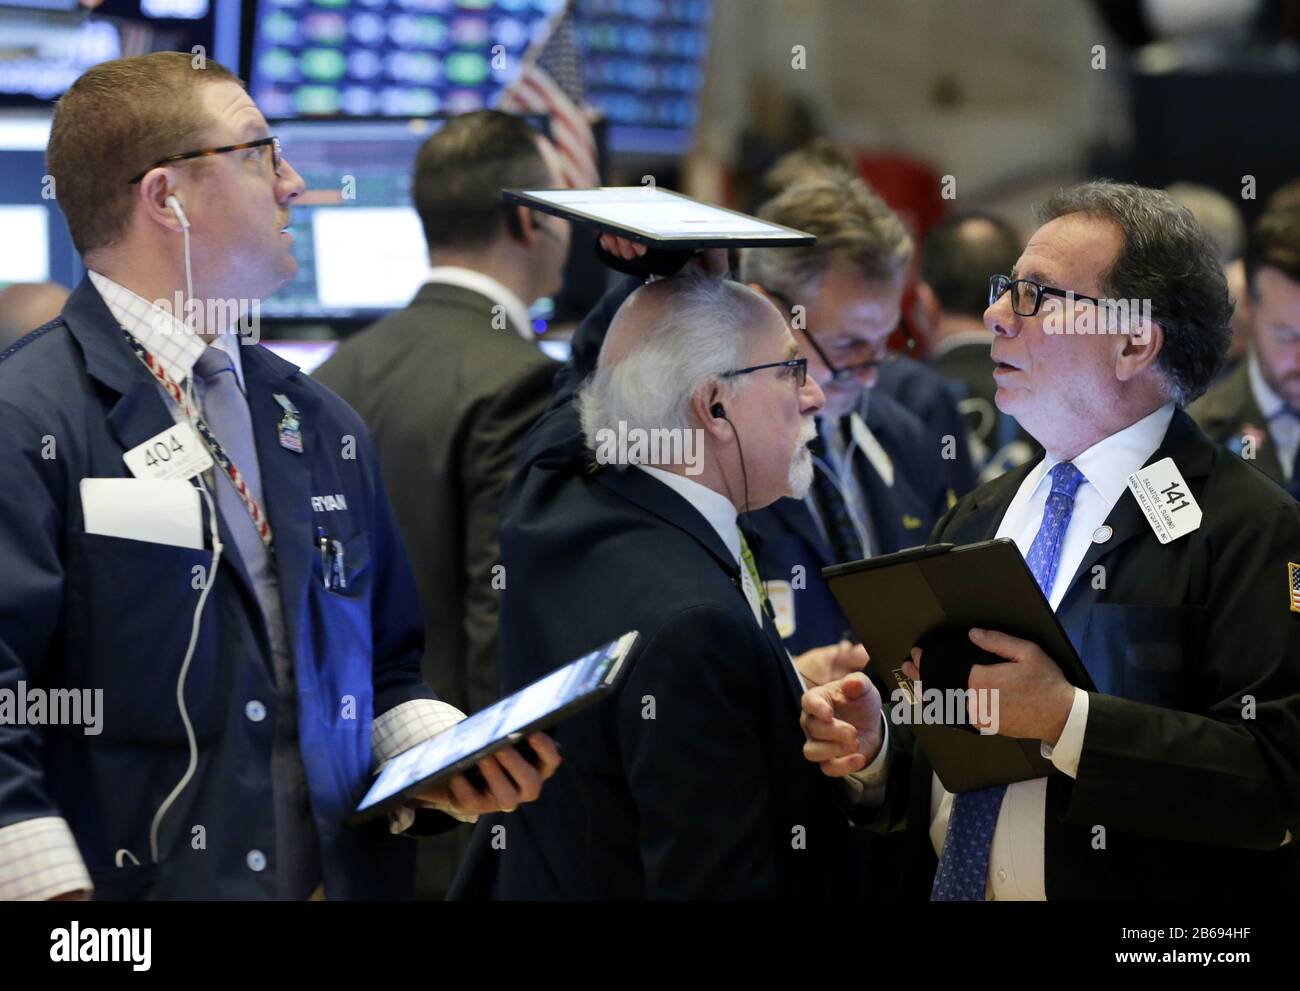 New York, United States. 10th Mar, 2020. Traders work on the the floor of the New York Stock Exchange at the opening bell on Wall Street in New York City on Tuesday, March 10, 2020. Wall Street began the day by recovering some of the massive losses on the Monday session where the DOW closed down over 2000 points. Photo by John Angelillo/UPI Credit: UPI/Alamy Live News Stock Photo